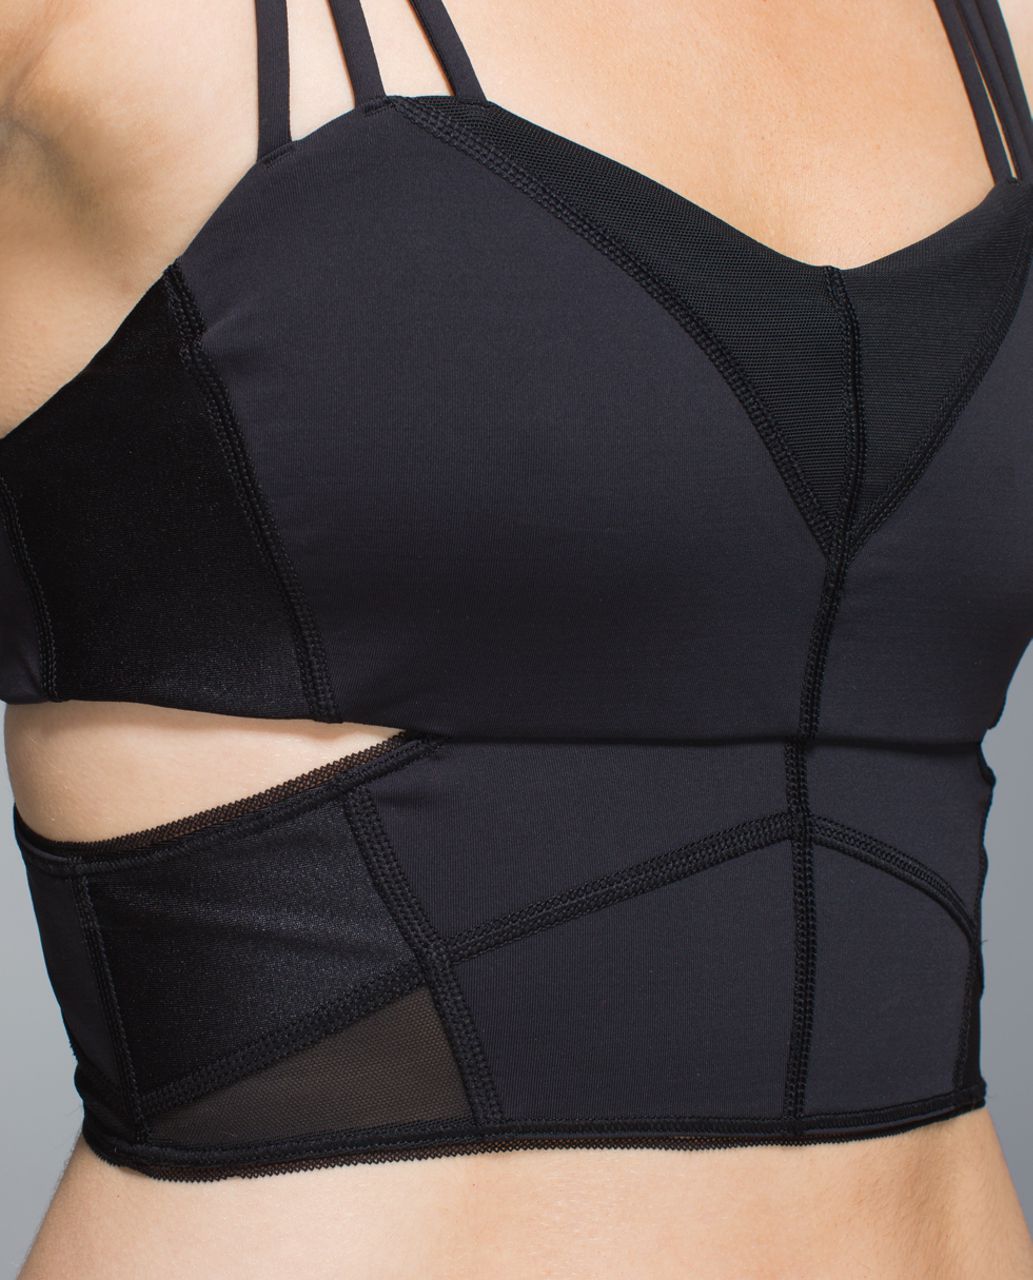 Lululemon Exquisite Tank II Black Mesh Cut Outs Strappy Luxtreme Sz 4 RARE  